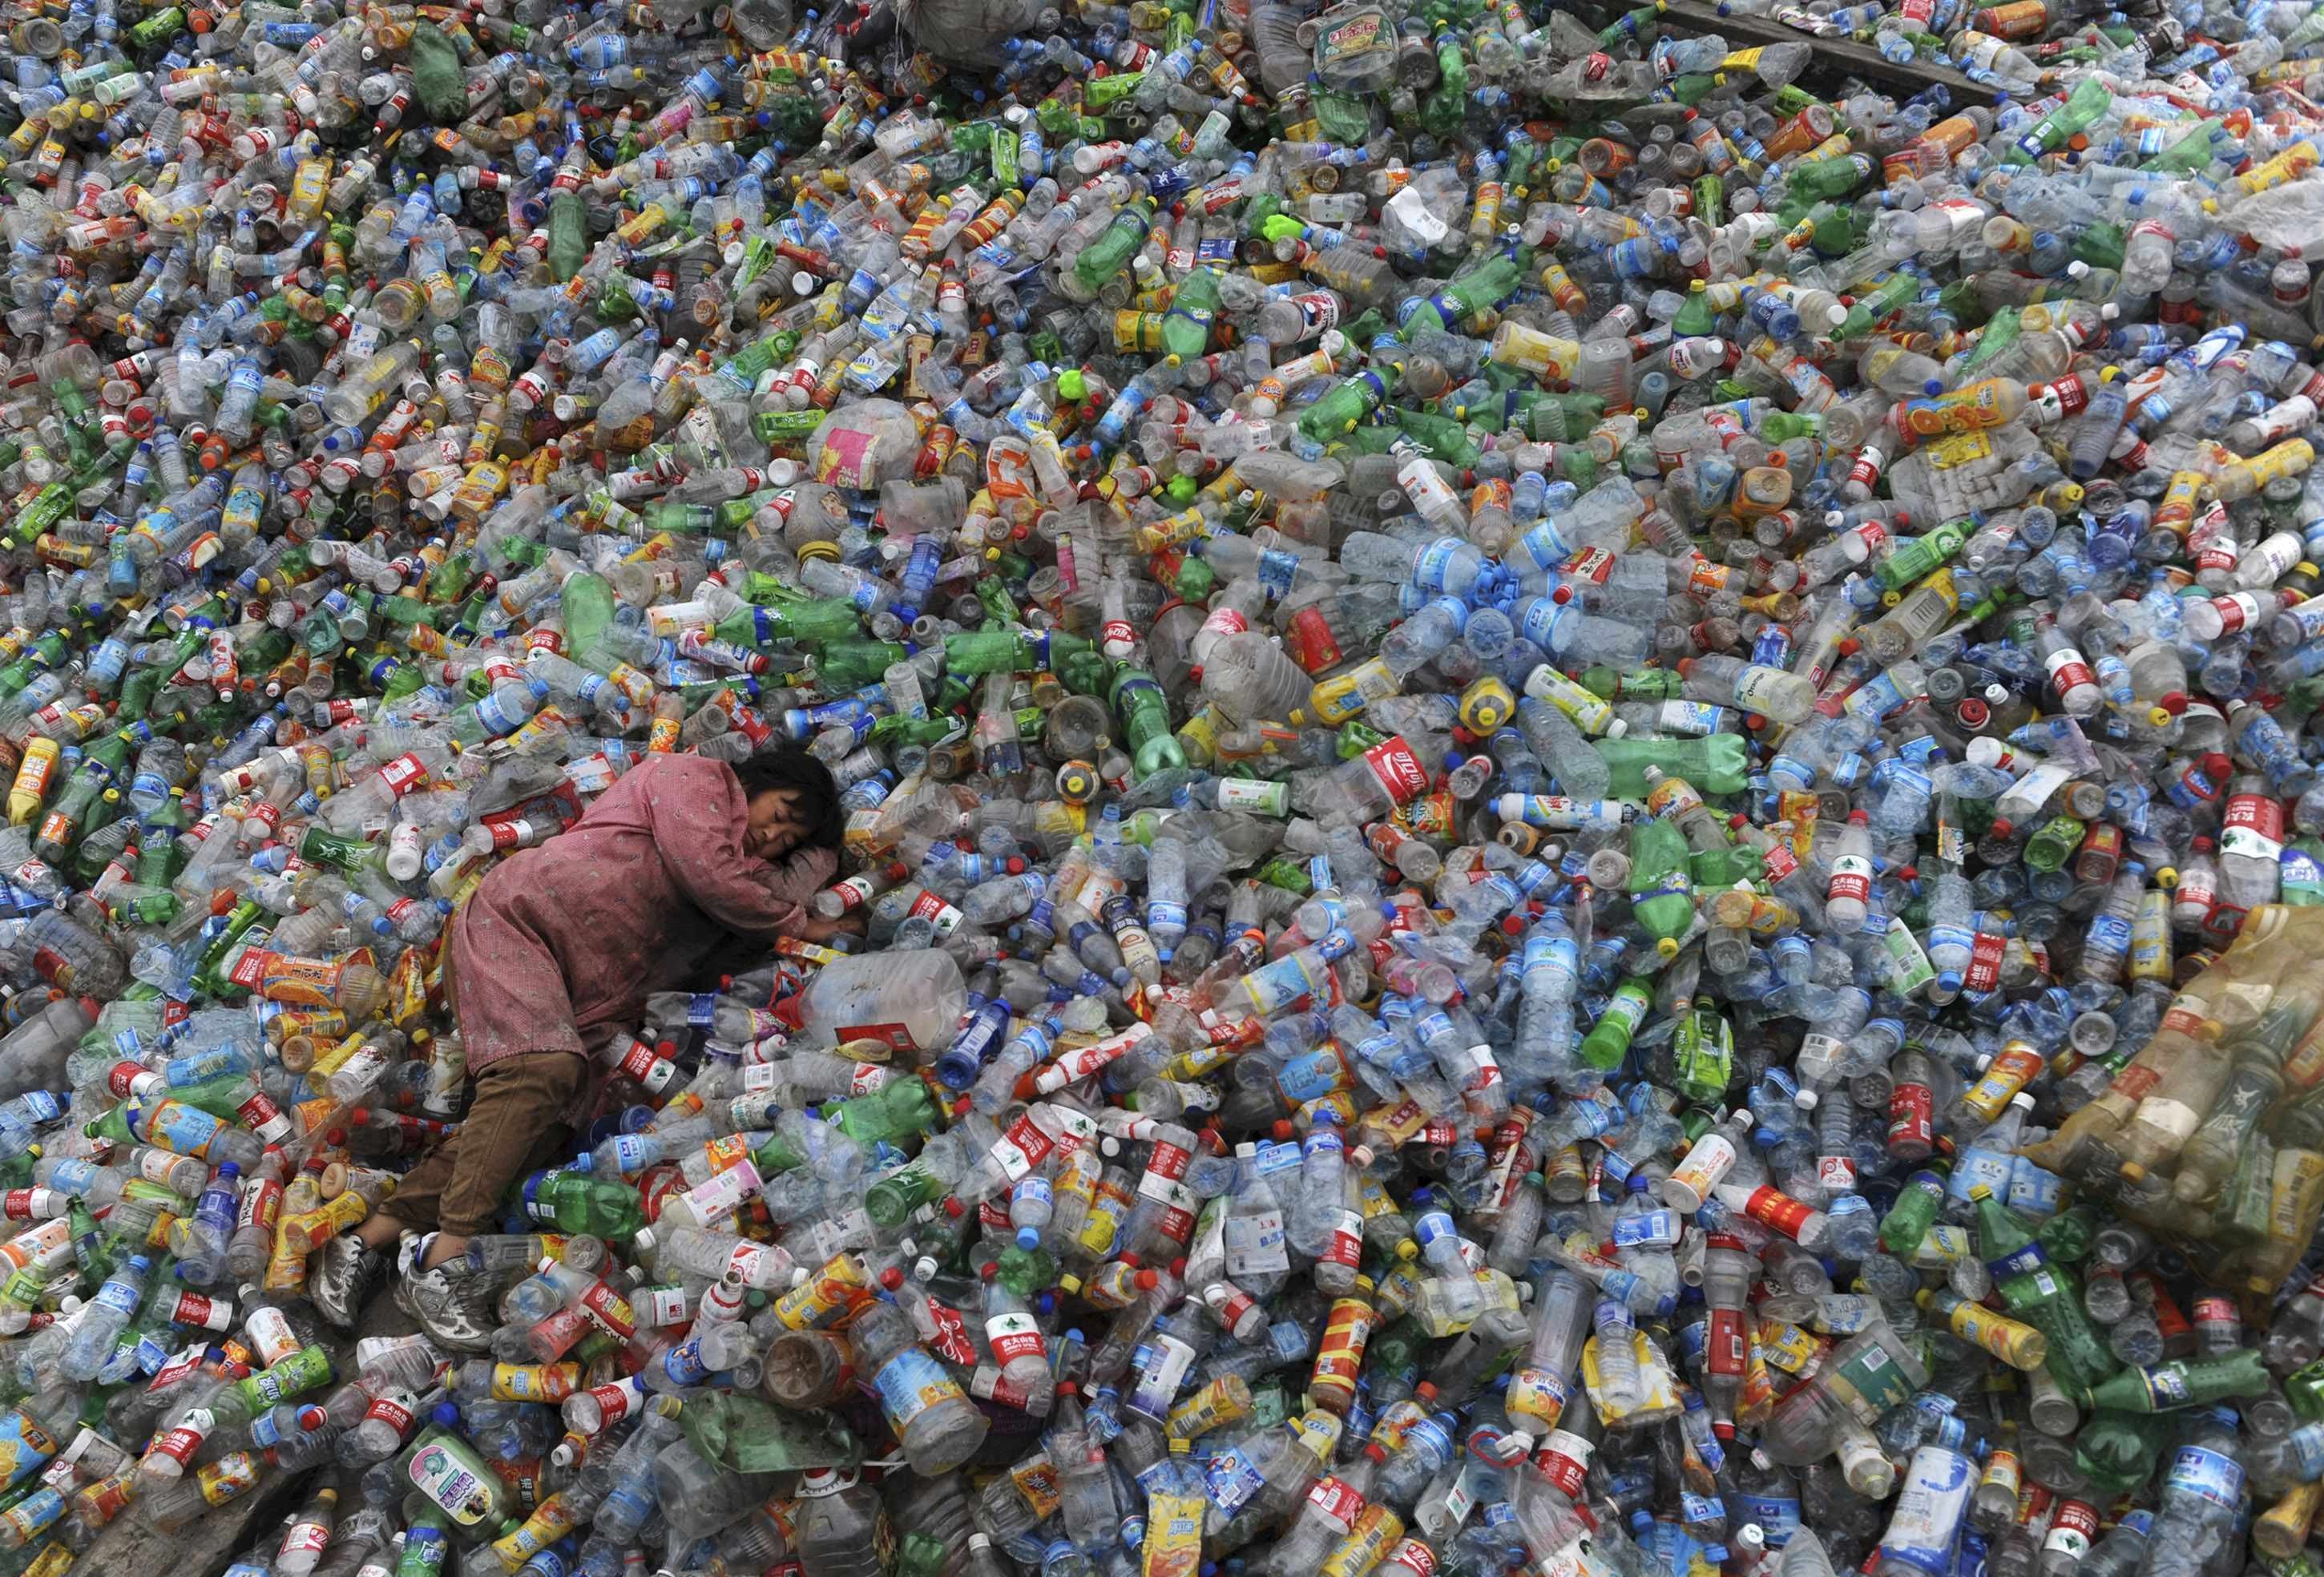 A labourer rests on piles of plastic bottles at a recycling centre in Zhejiang province. Photo: Reuters